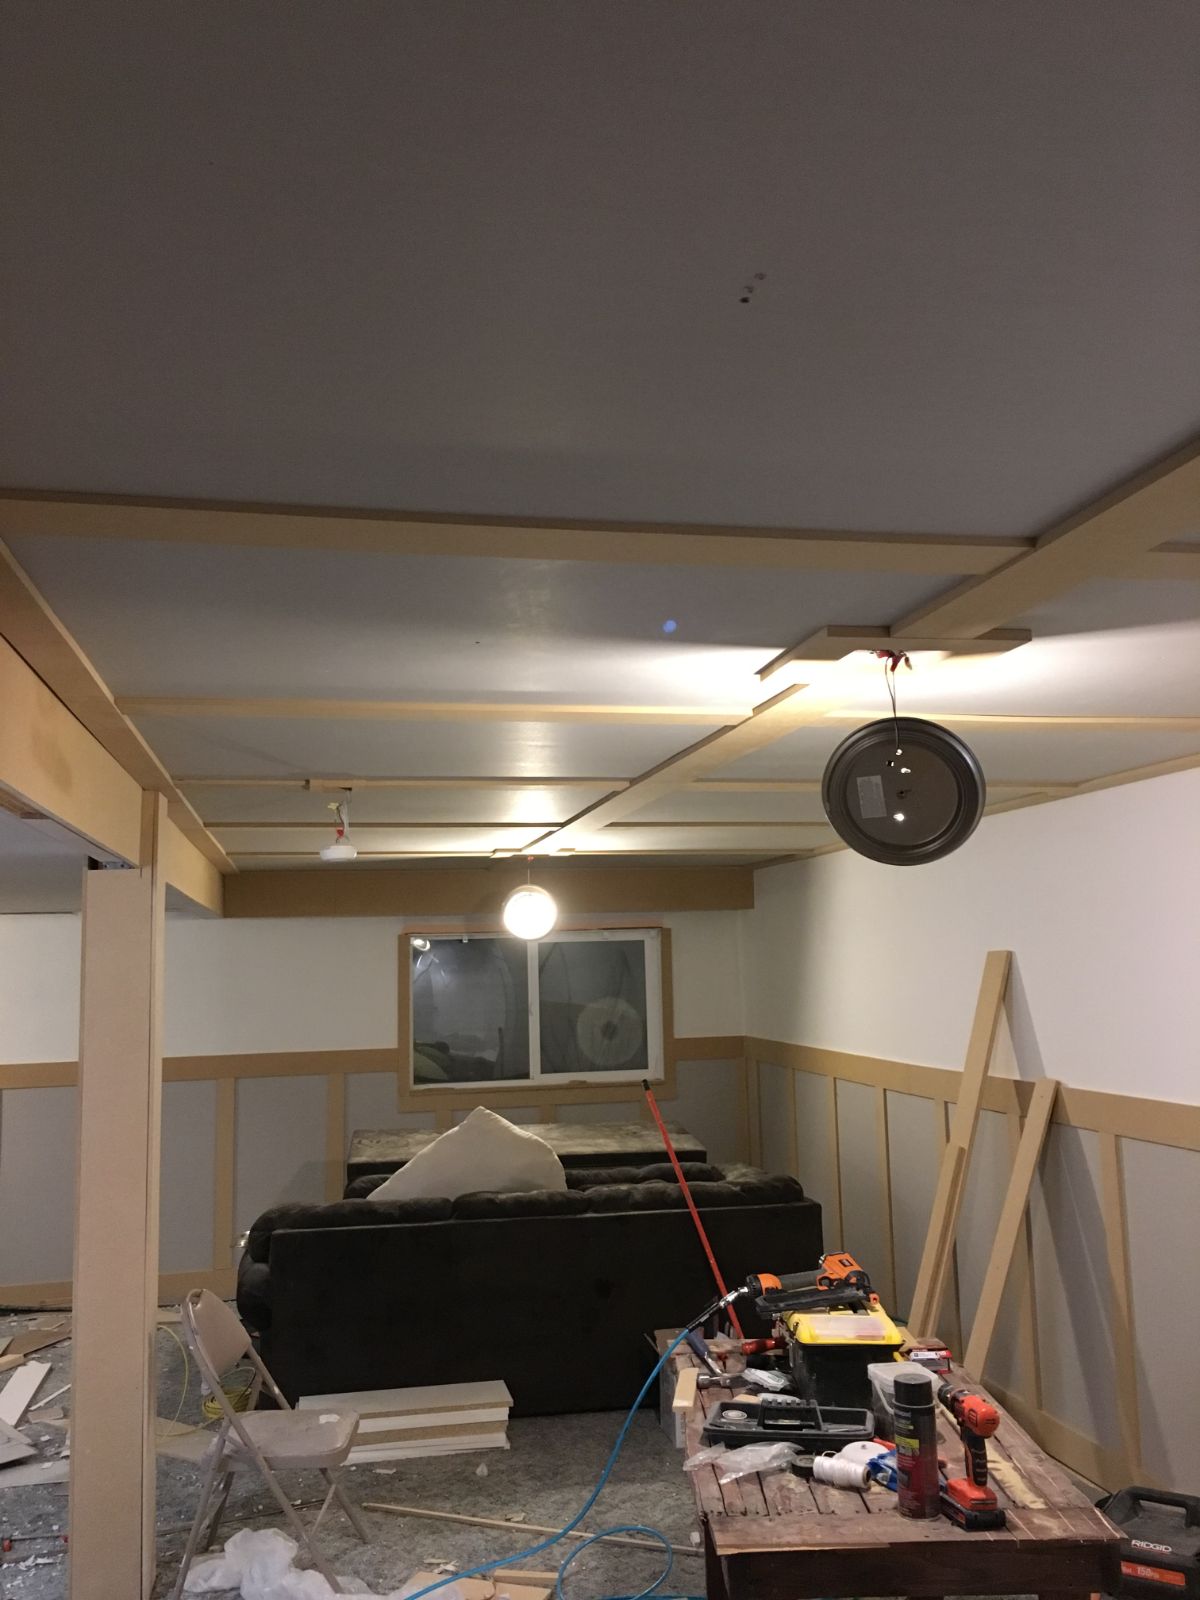 Ceiling wood up